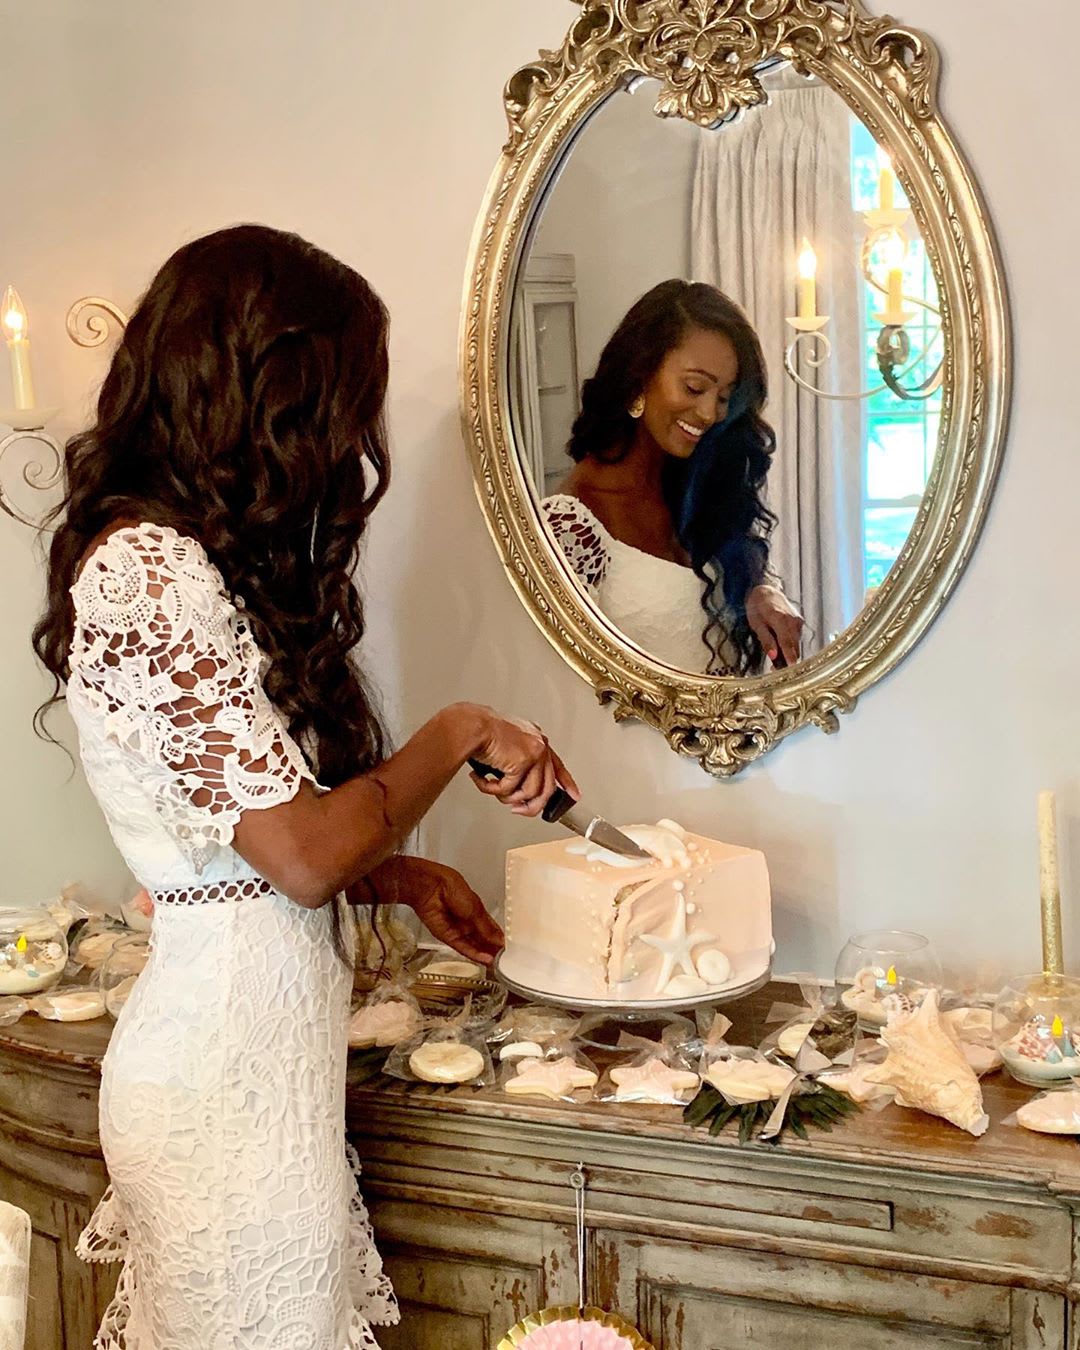 What To Wear: Bridal Shower Outfits For Brides & Guests 2023